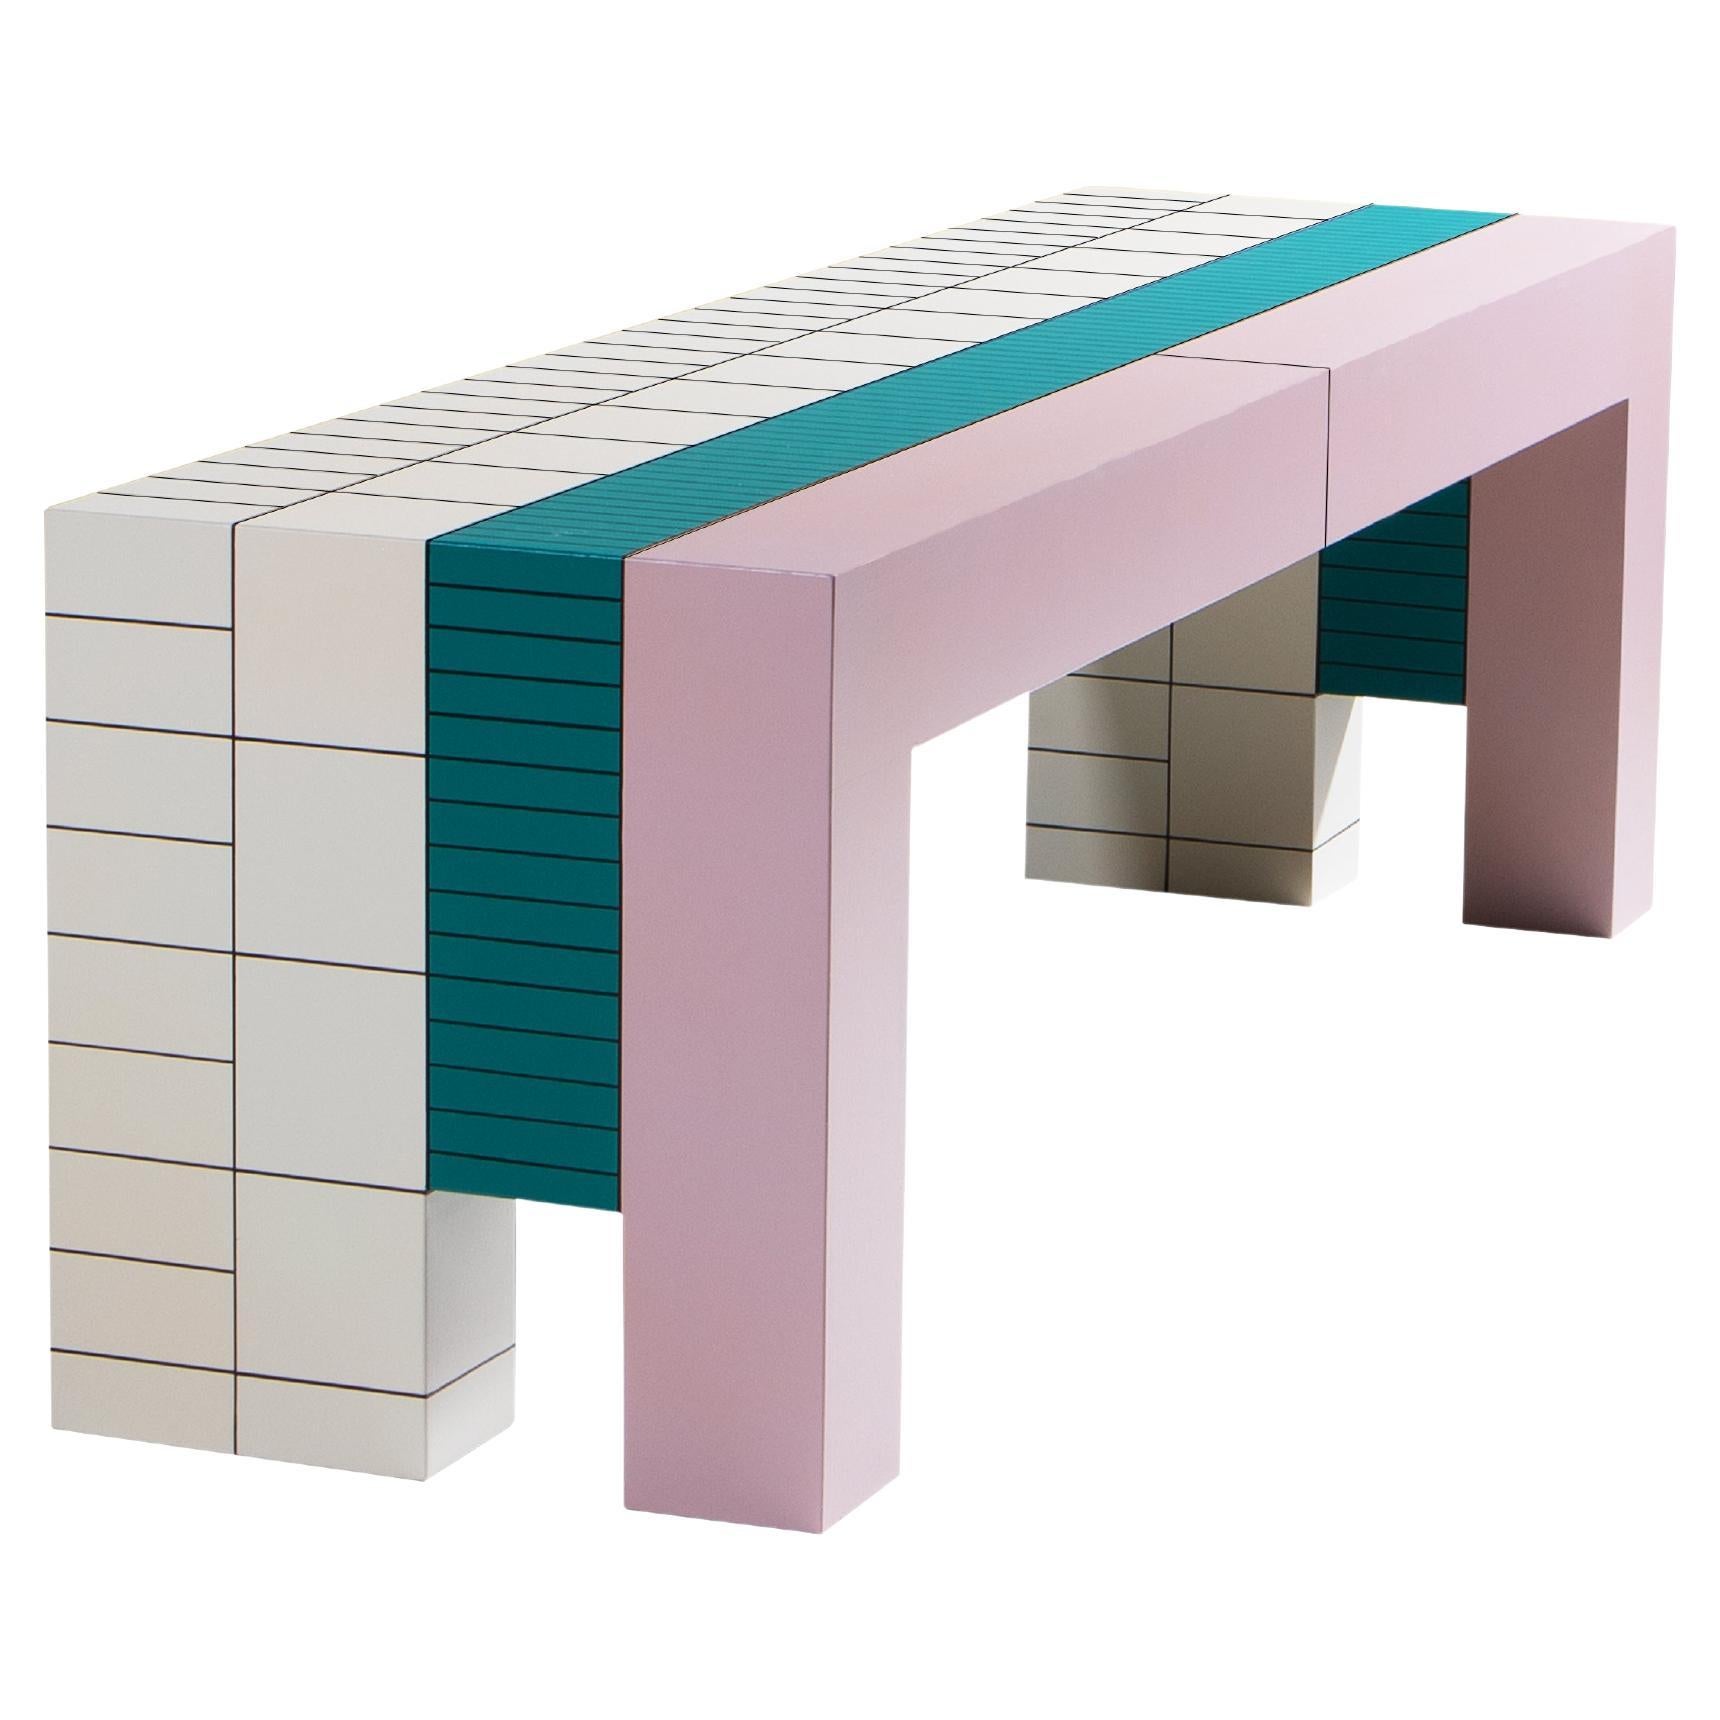 Modern Handpainted Hardwood Bench Coffeetable Dilmos Colourful Geometric Graphic For Sale